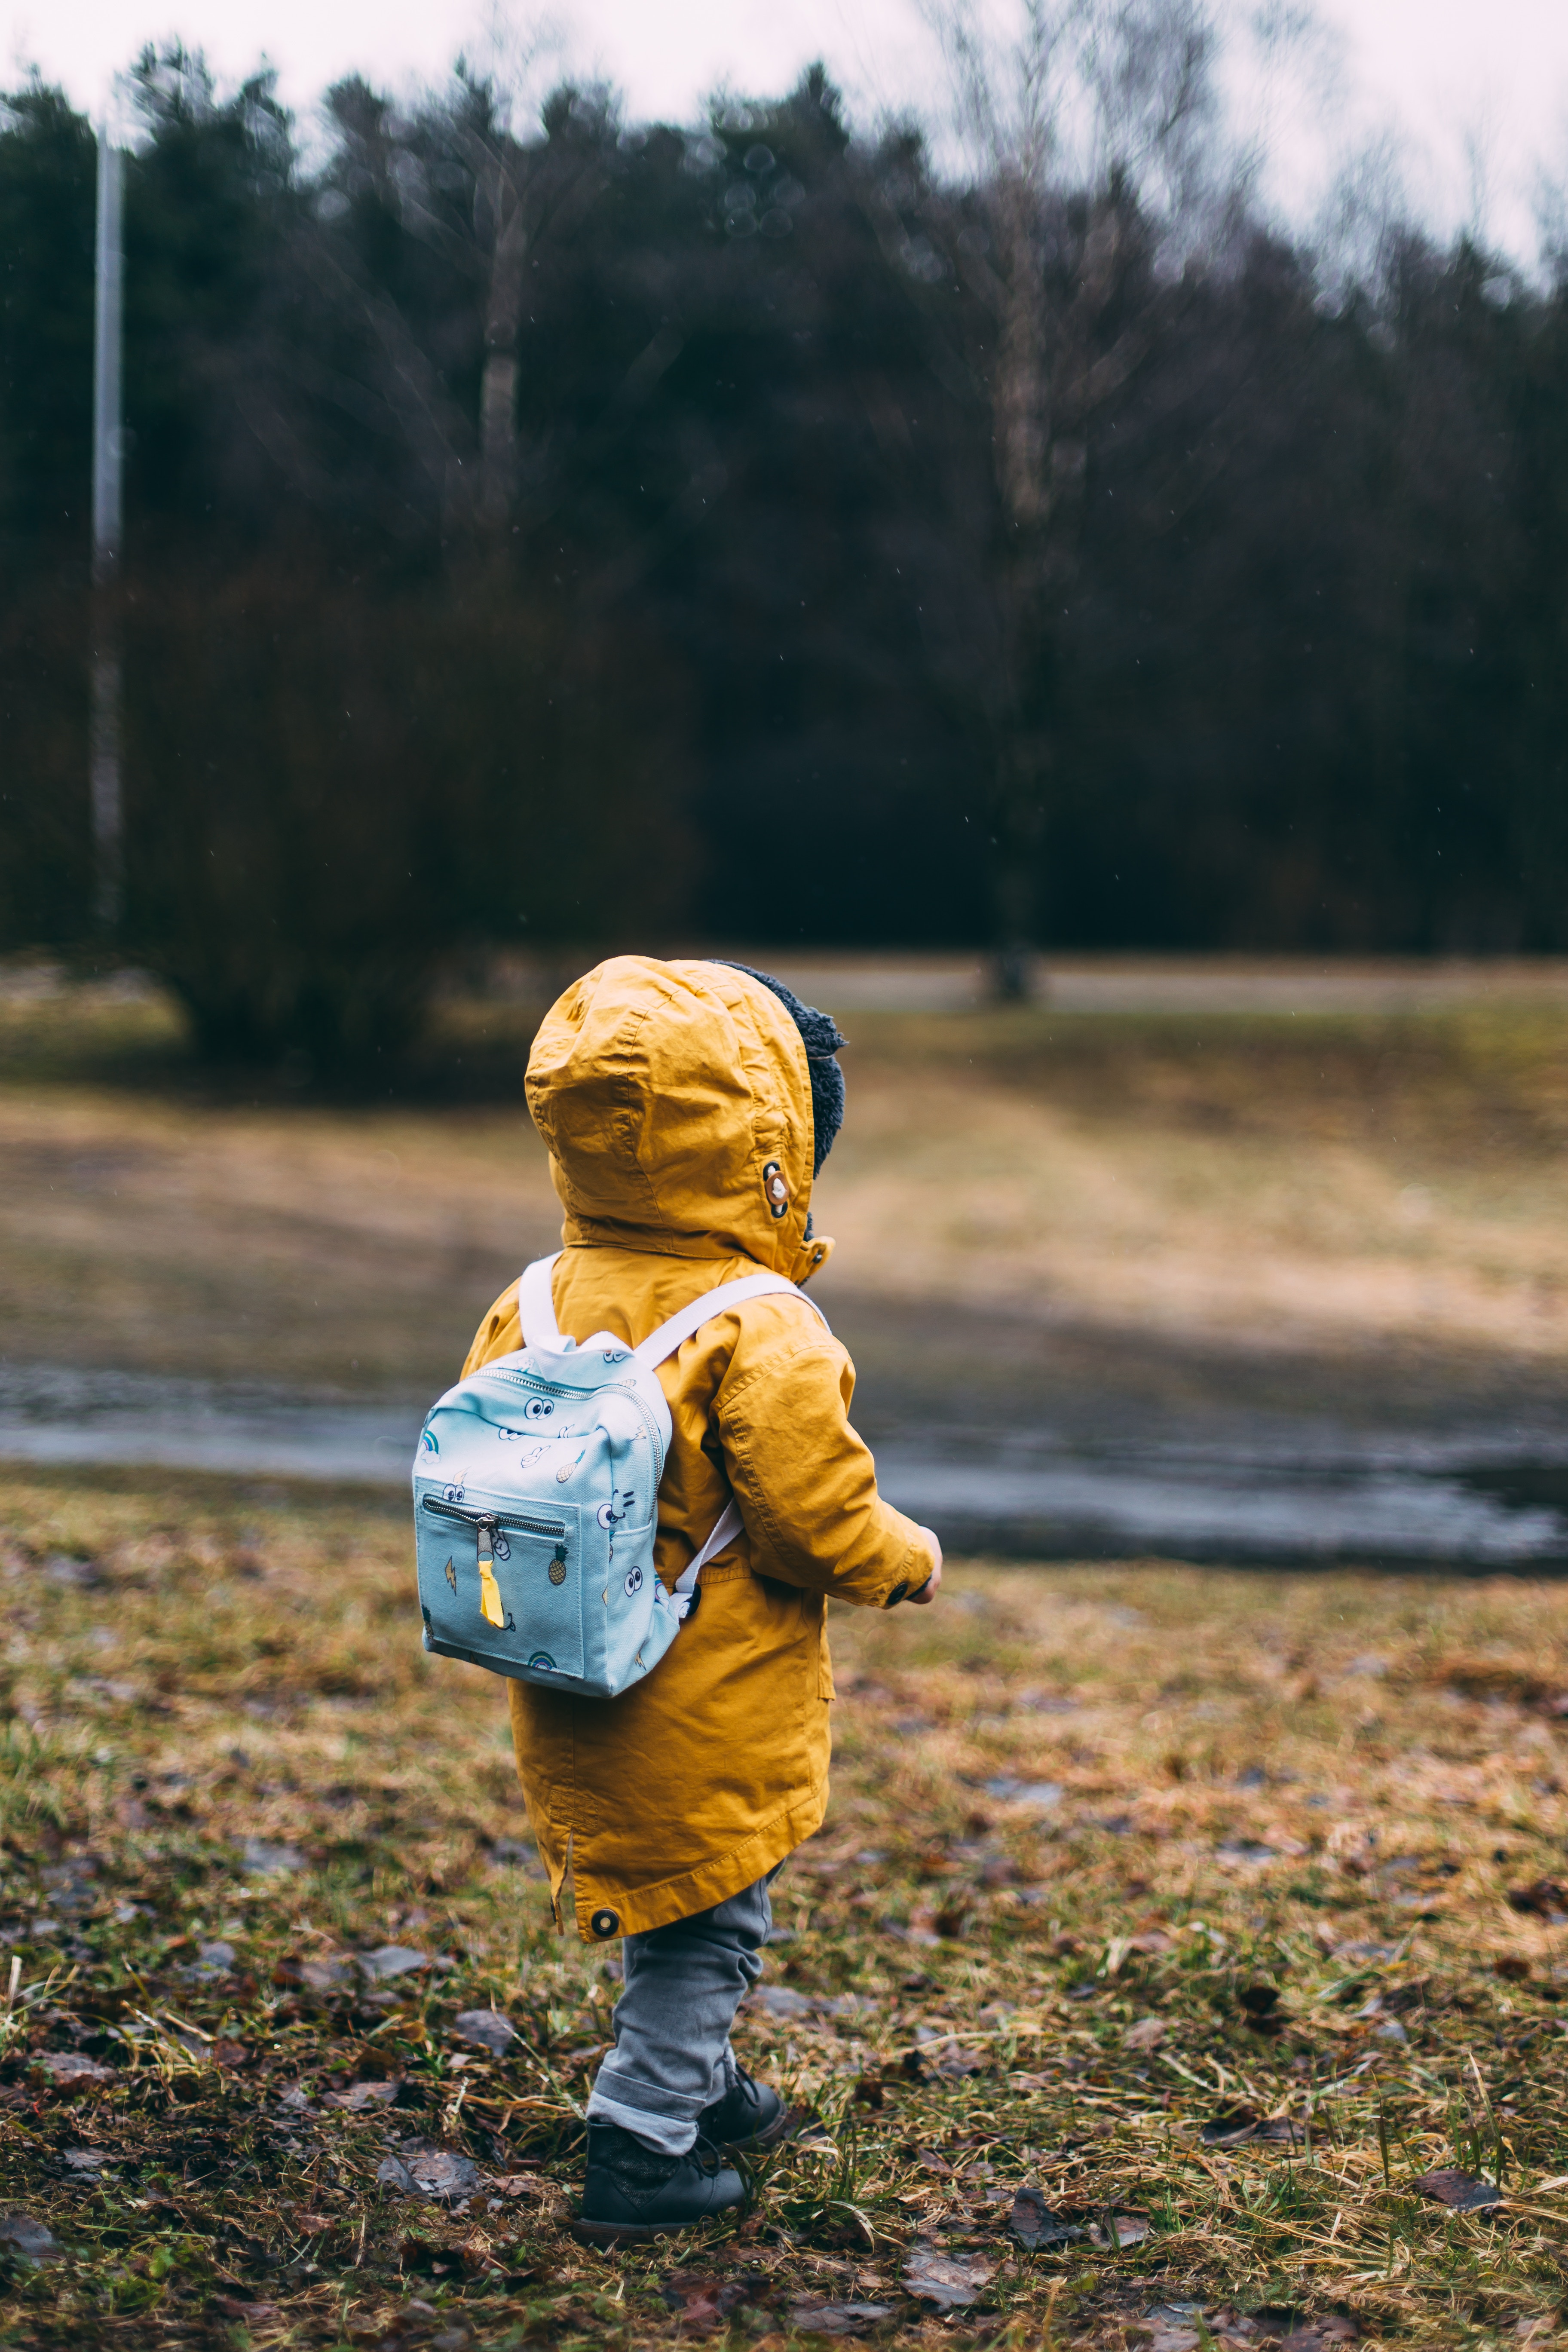 child, miscellaneous, autumn, miscellanea, stroll, backpack, rucksack High Definition image